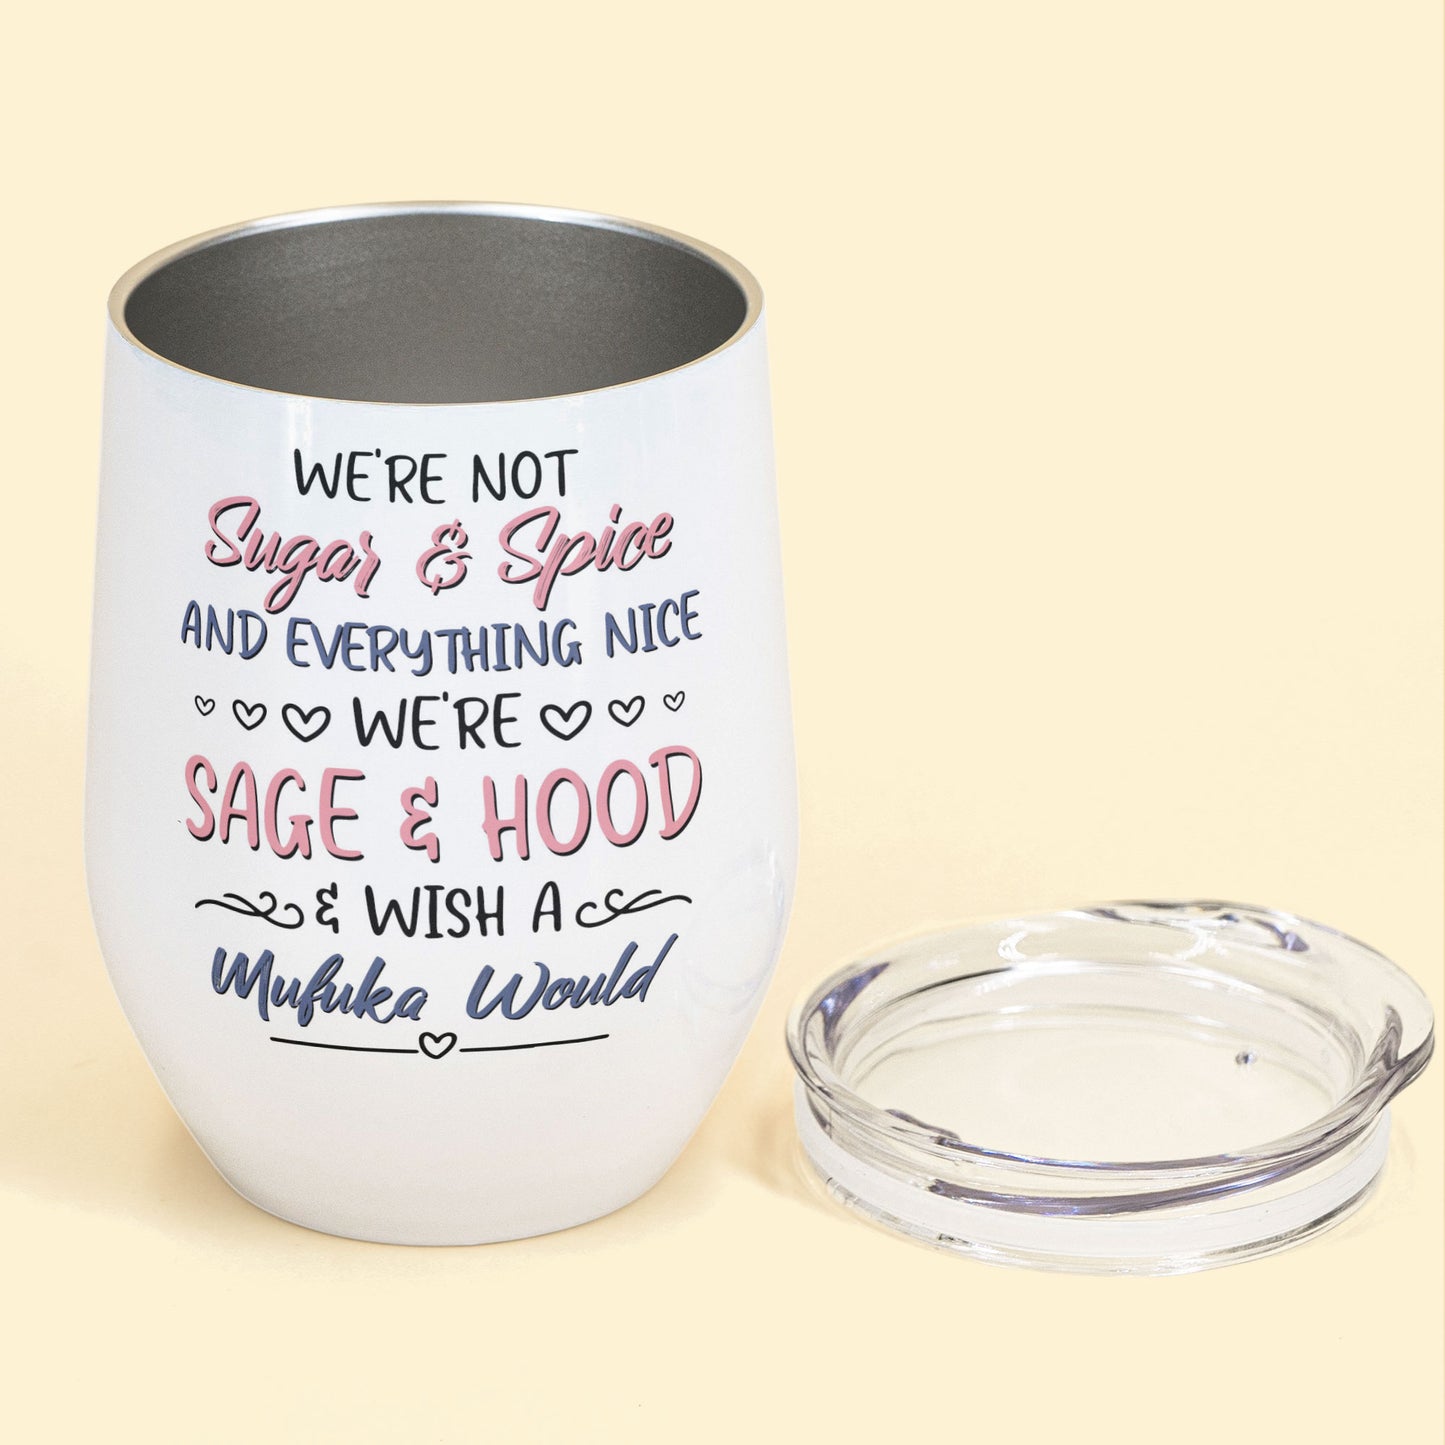 We're Sage And Hood - Personalized Wine Tumbler - Birthday Gift, Funny Friendship Gift For Besties, Best Friends, Soul Sisters